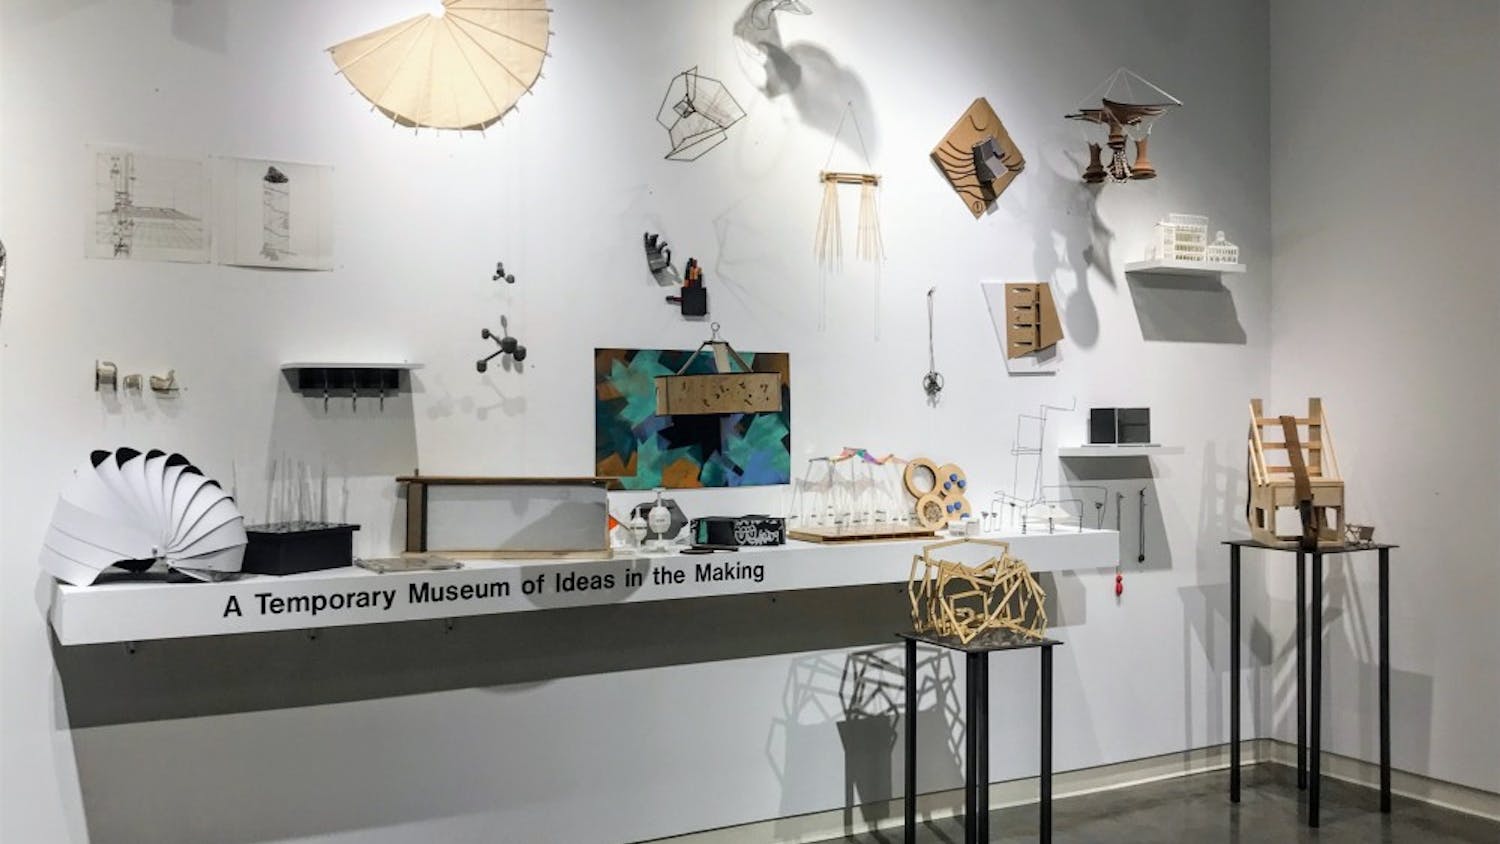 “A Temporary Museum of Ideas in the Making” features innovative student work from architecture courses in the studio art department.